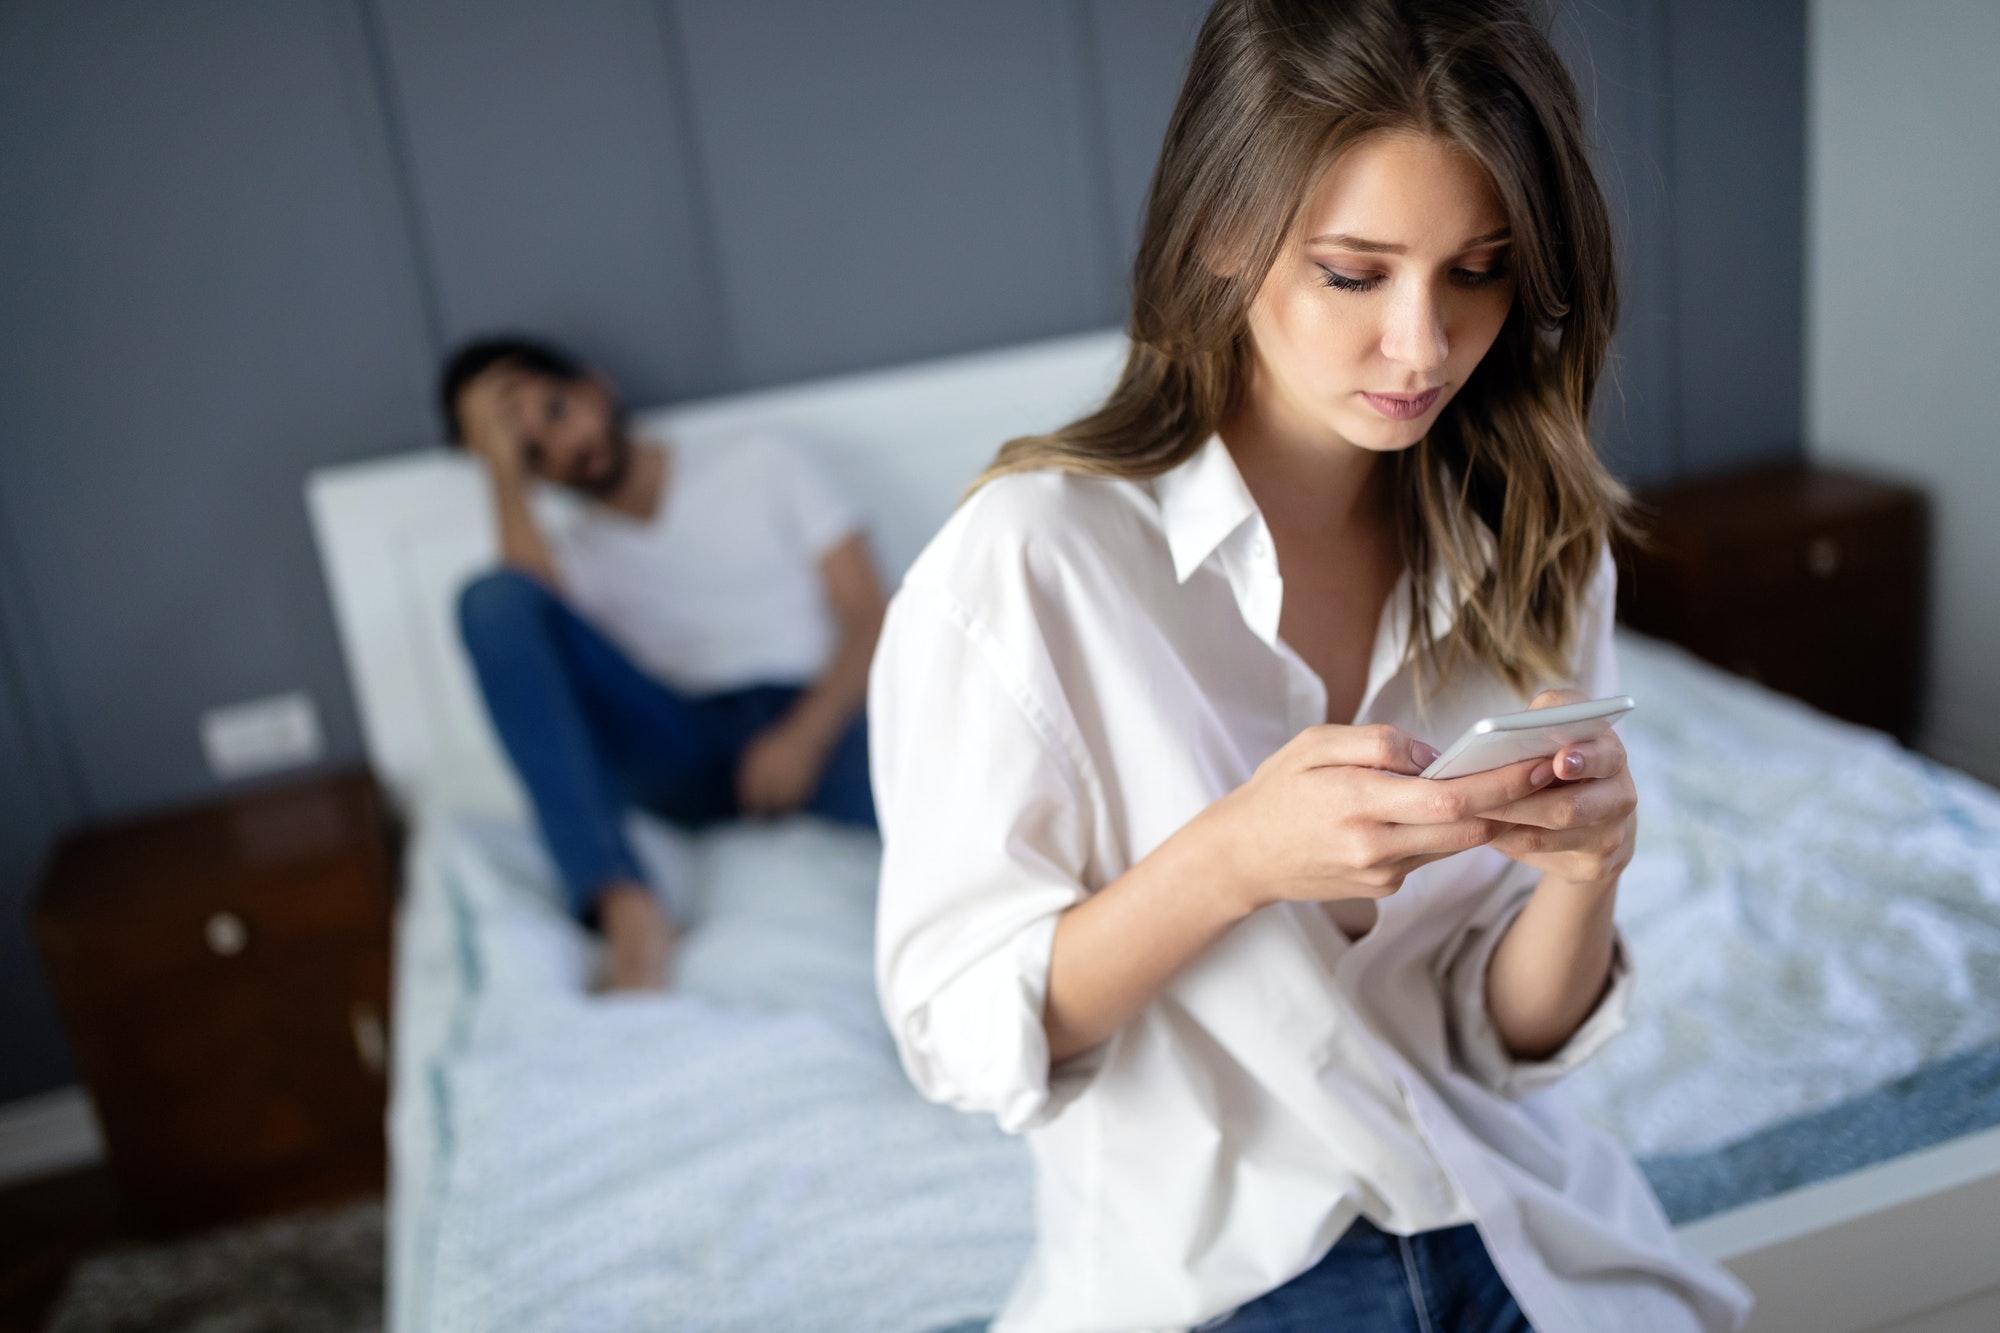 Unhappy couple ignoring each other using mobile phone